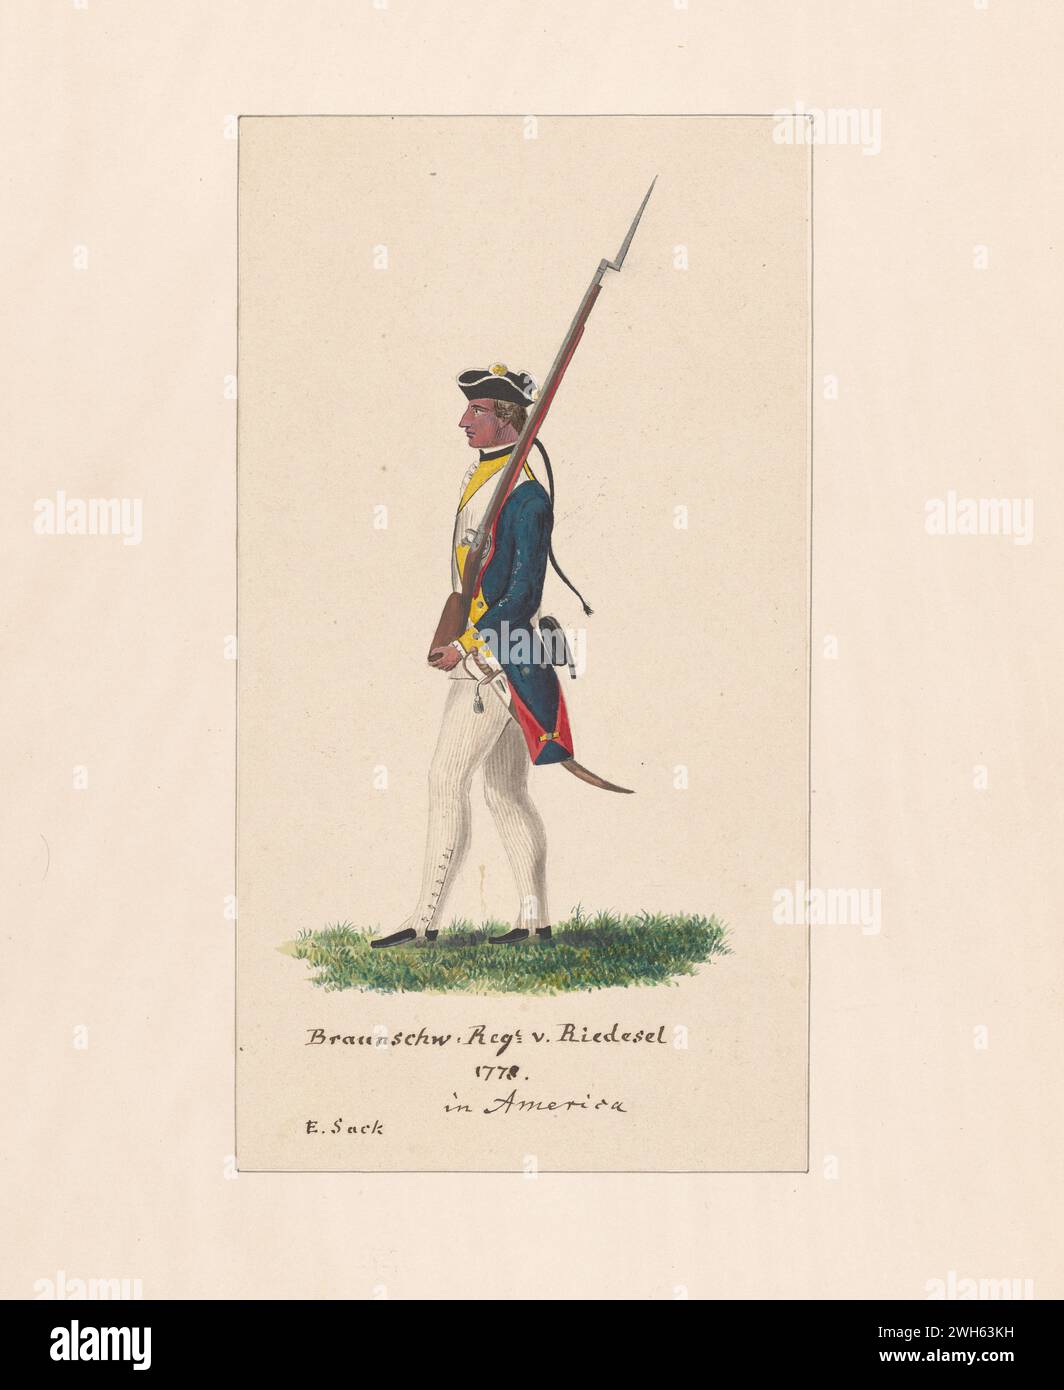 “Watercolor of a Soldier from a regiment in the Brunswick (Braunschweig) Corps during the American Revolutionary War” circa 1778.    From a series of prints by Friedrich von German captain of a regiment from Hesse-Hanau, one of the many German auxiliary troops hired by George III to fight in the American Revolution. He arrived in North America in 1775 During the war, he painted a series of watercolors of American, British, and German soldiers.  This regiment operated under Major General Riedesel Stock Photo